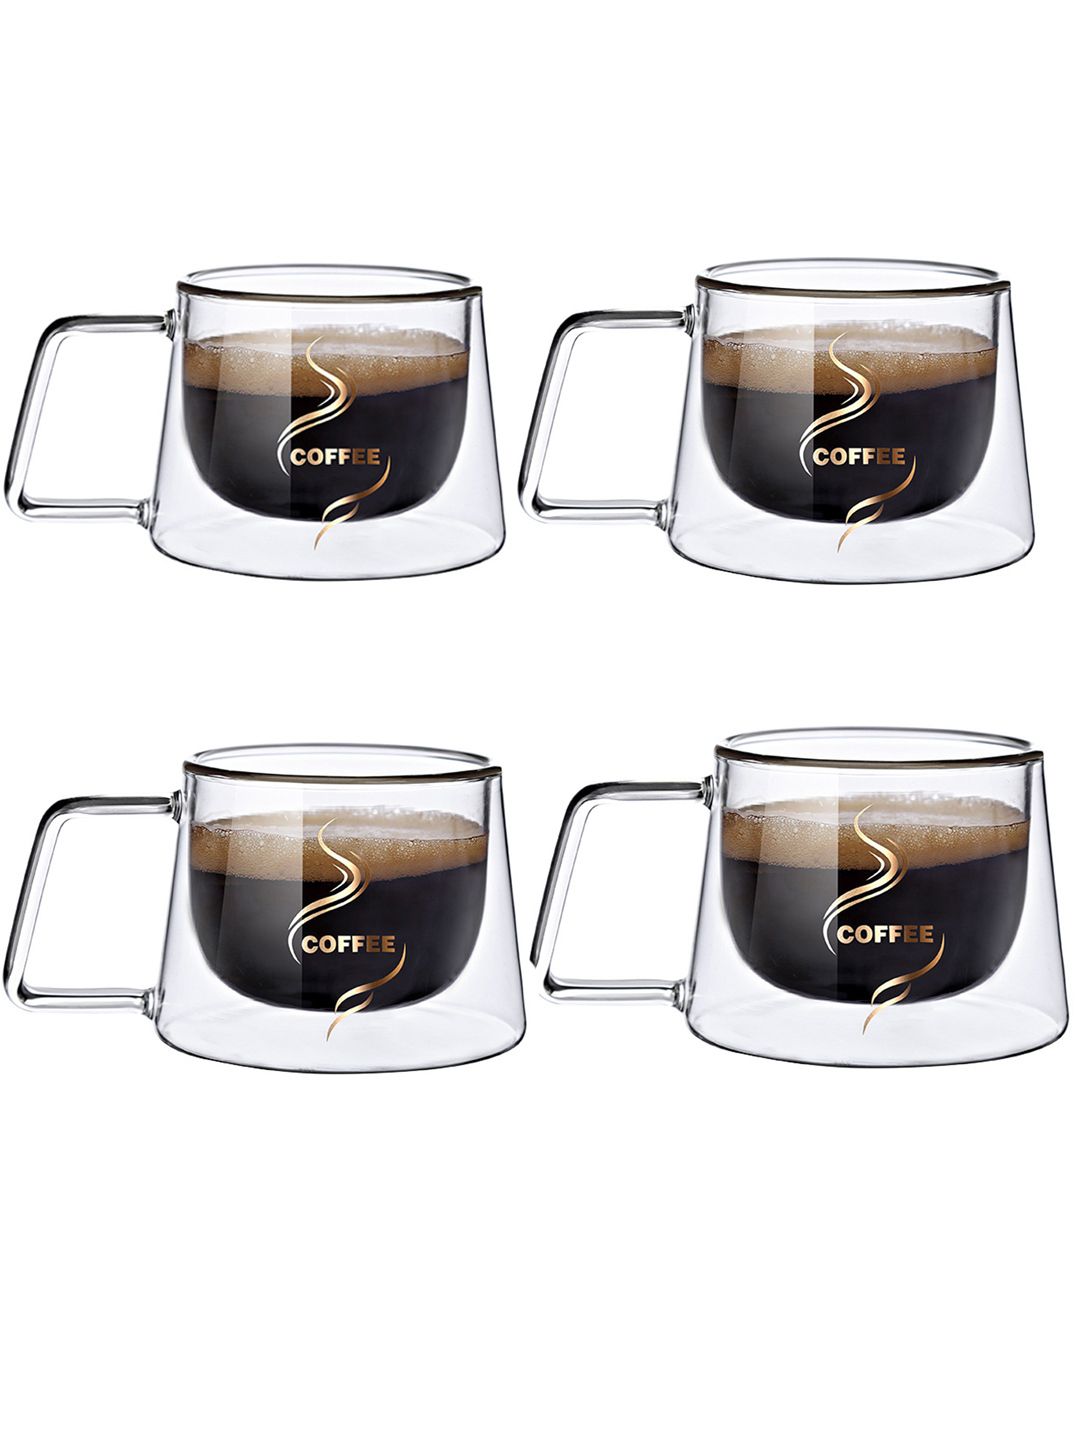 BonZeaL Transparent & Gold-Toned Printed Glass Transparent Cups Set of Cups and Mugs Price in India